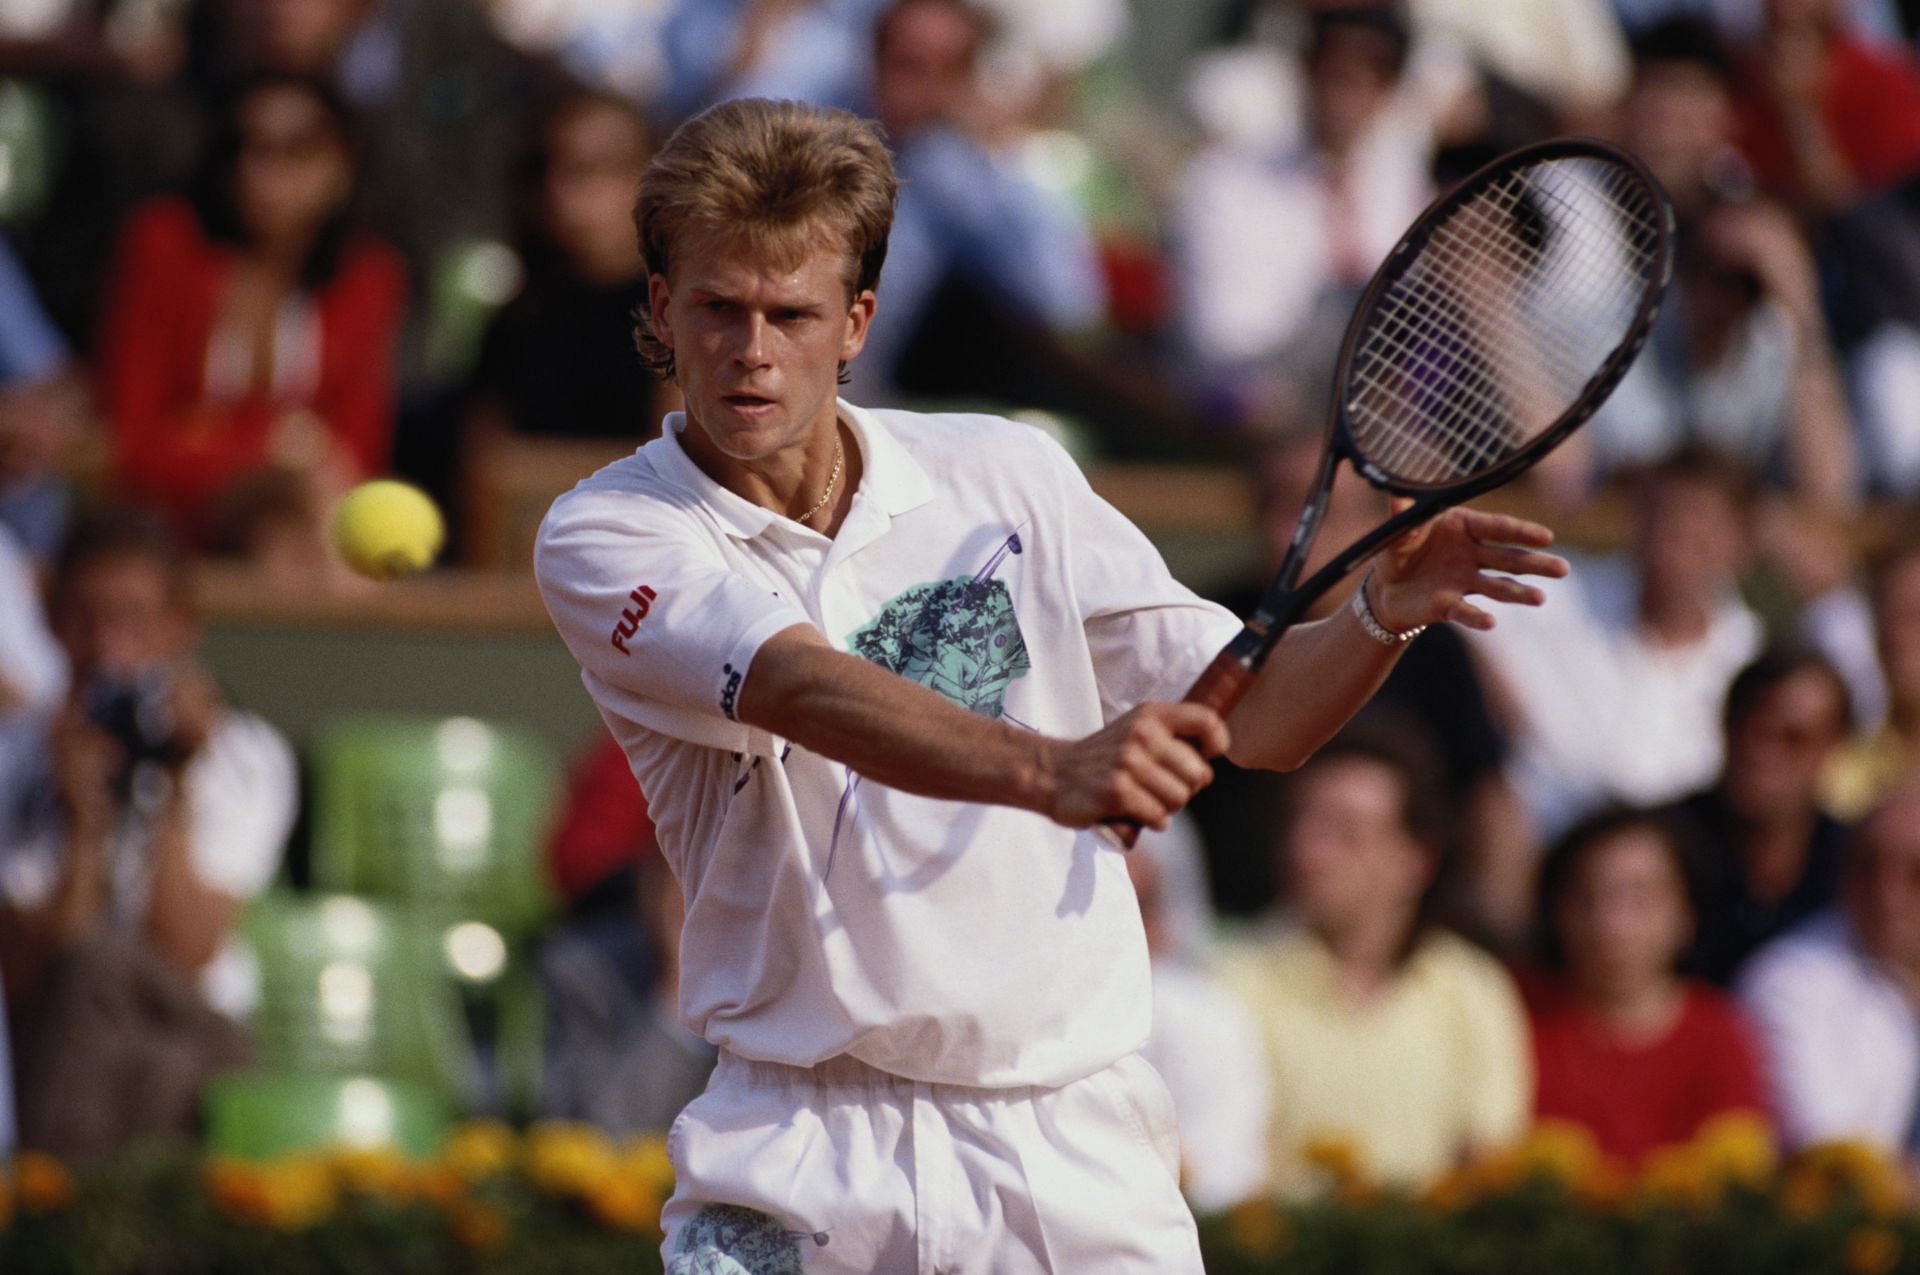 Stefan Edberg plays a backhand volley in a match against Sergi Bruguera at the 1990 French Open